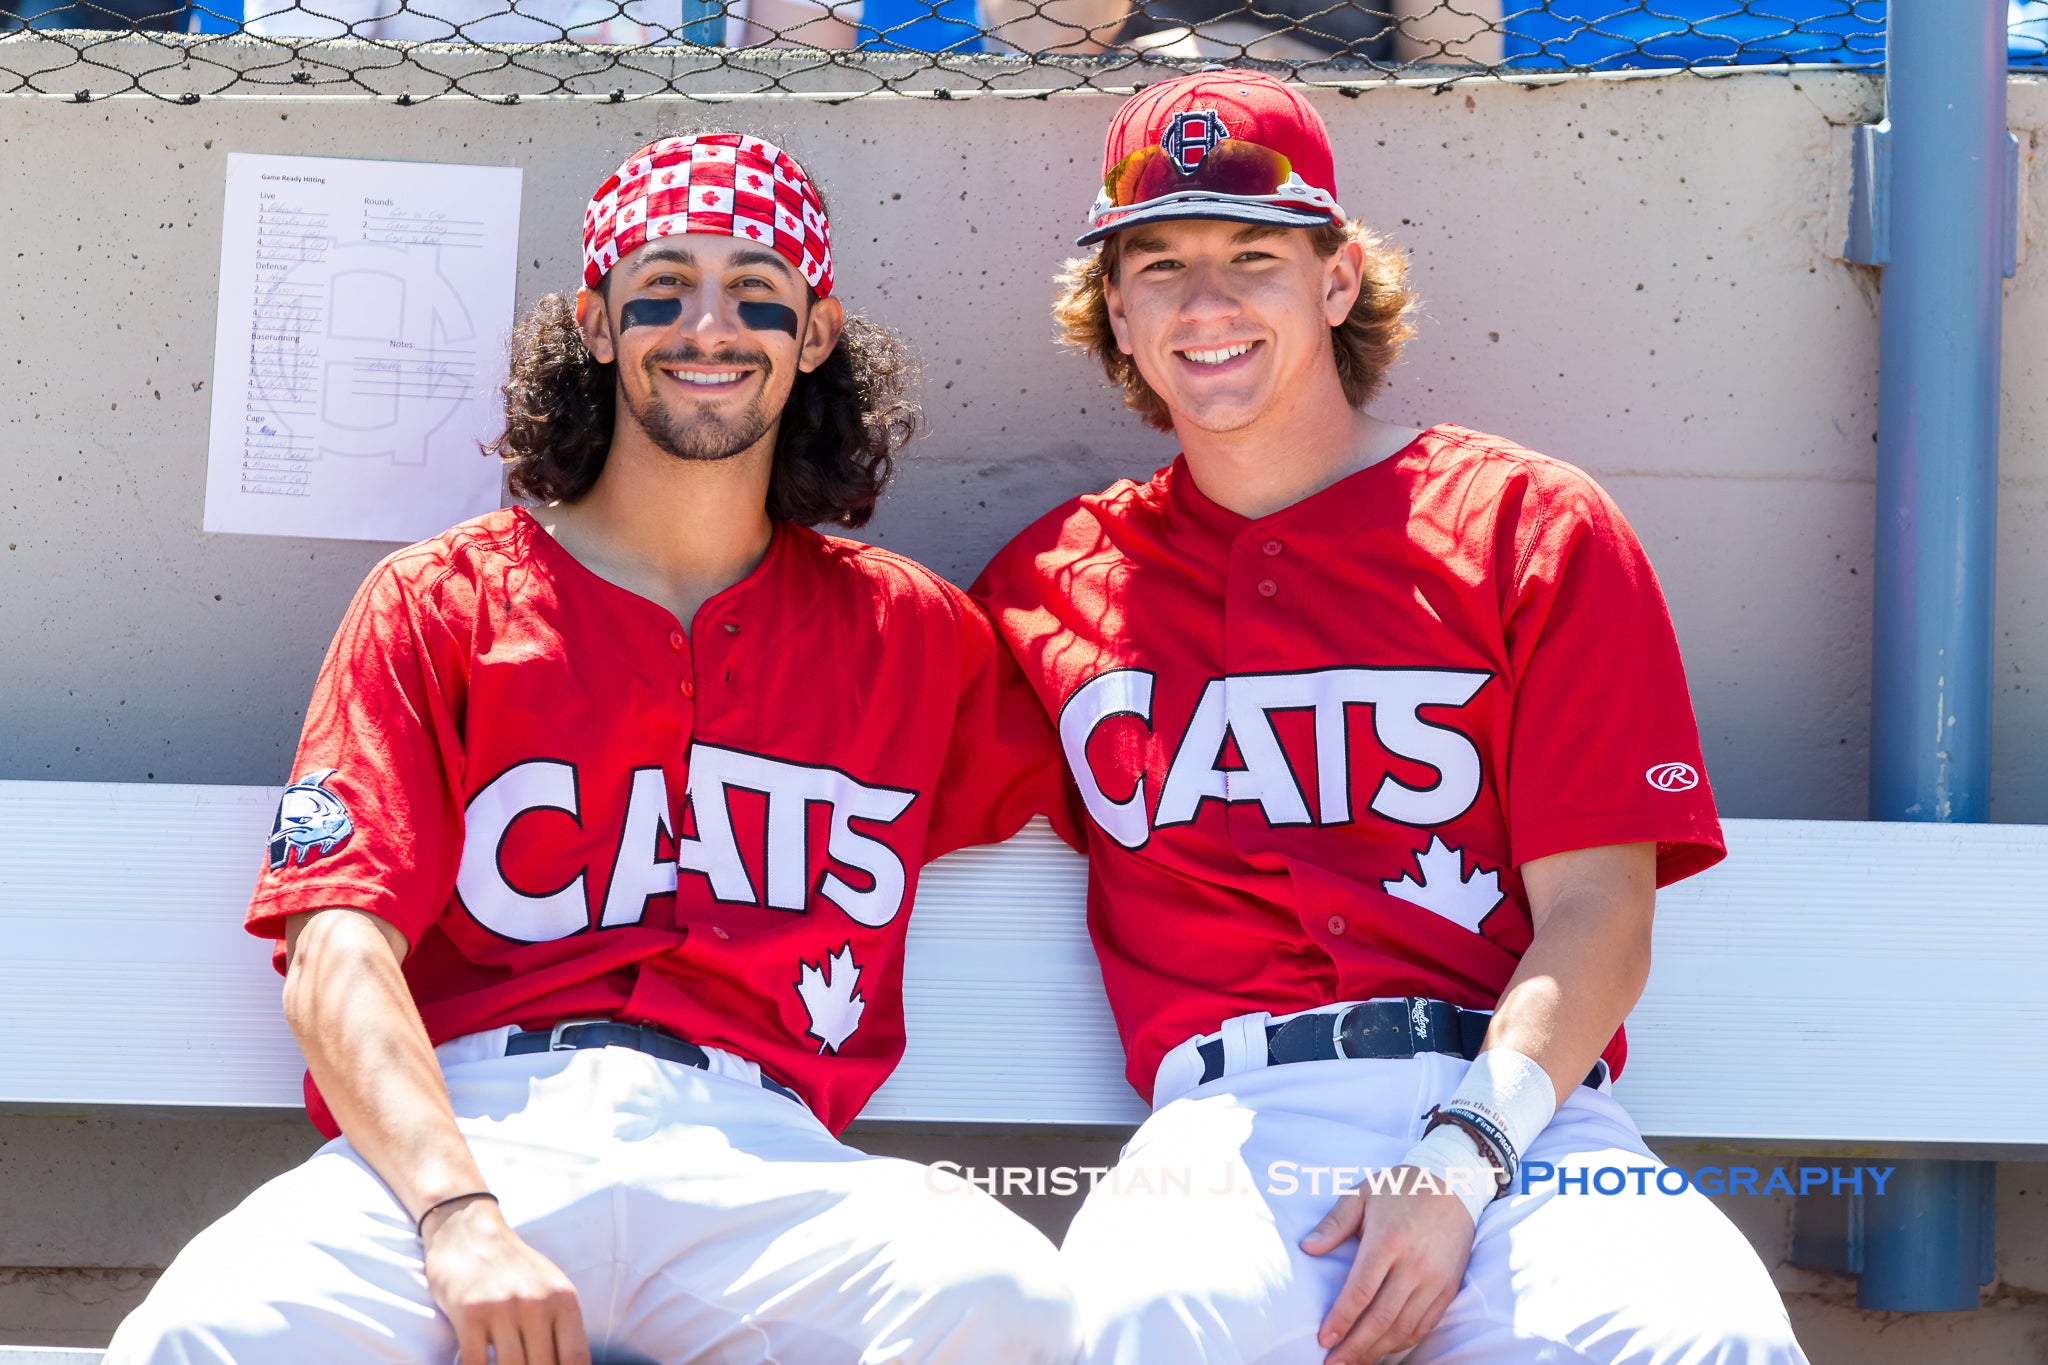 Victoria HarbourCats GAME WORN RED "CATS" JERSEYS